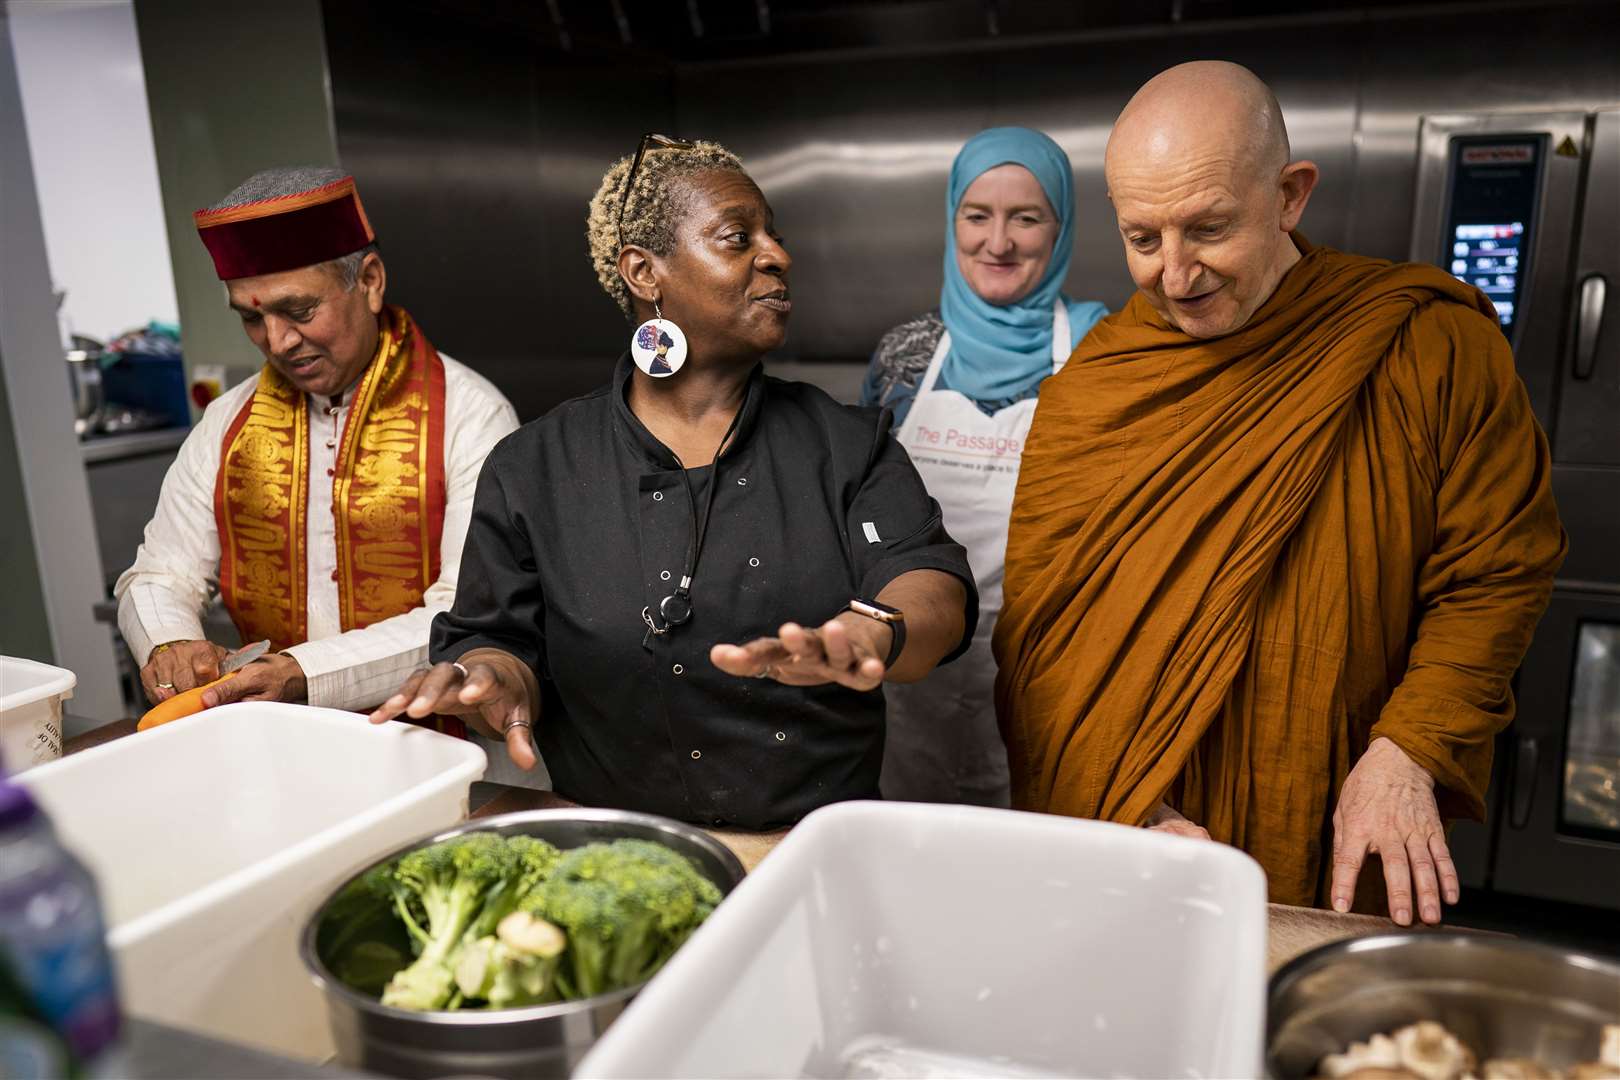 Krishan Kant Attri, Julie Siddiqi and Venerable Ajahn Amaro prepare food as they join other faith leaders at the Big Help Out event at the Passage in London (Aaron Chown/PA)